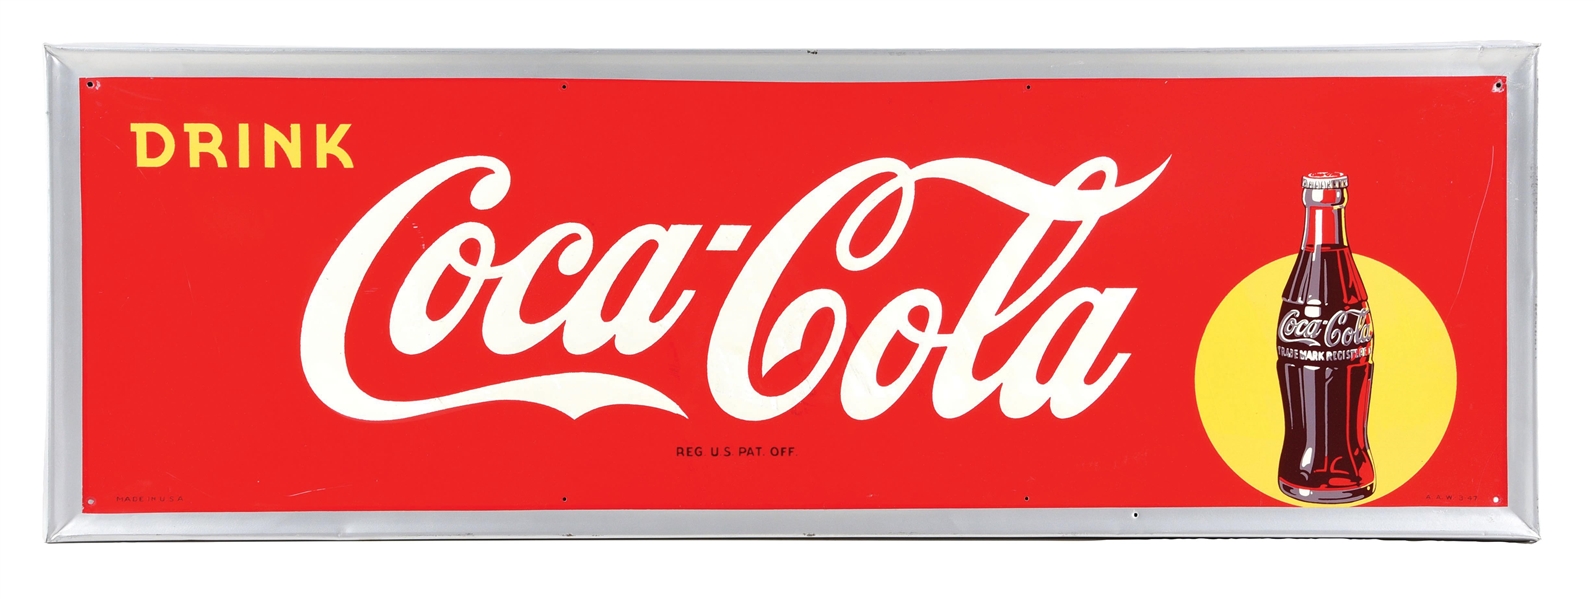 DRINK COCA-COLA EMBOSSED TIN SIGN W/ BOTTLE GRAPHIC. 